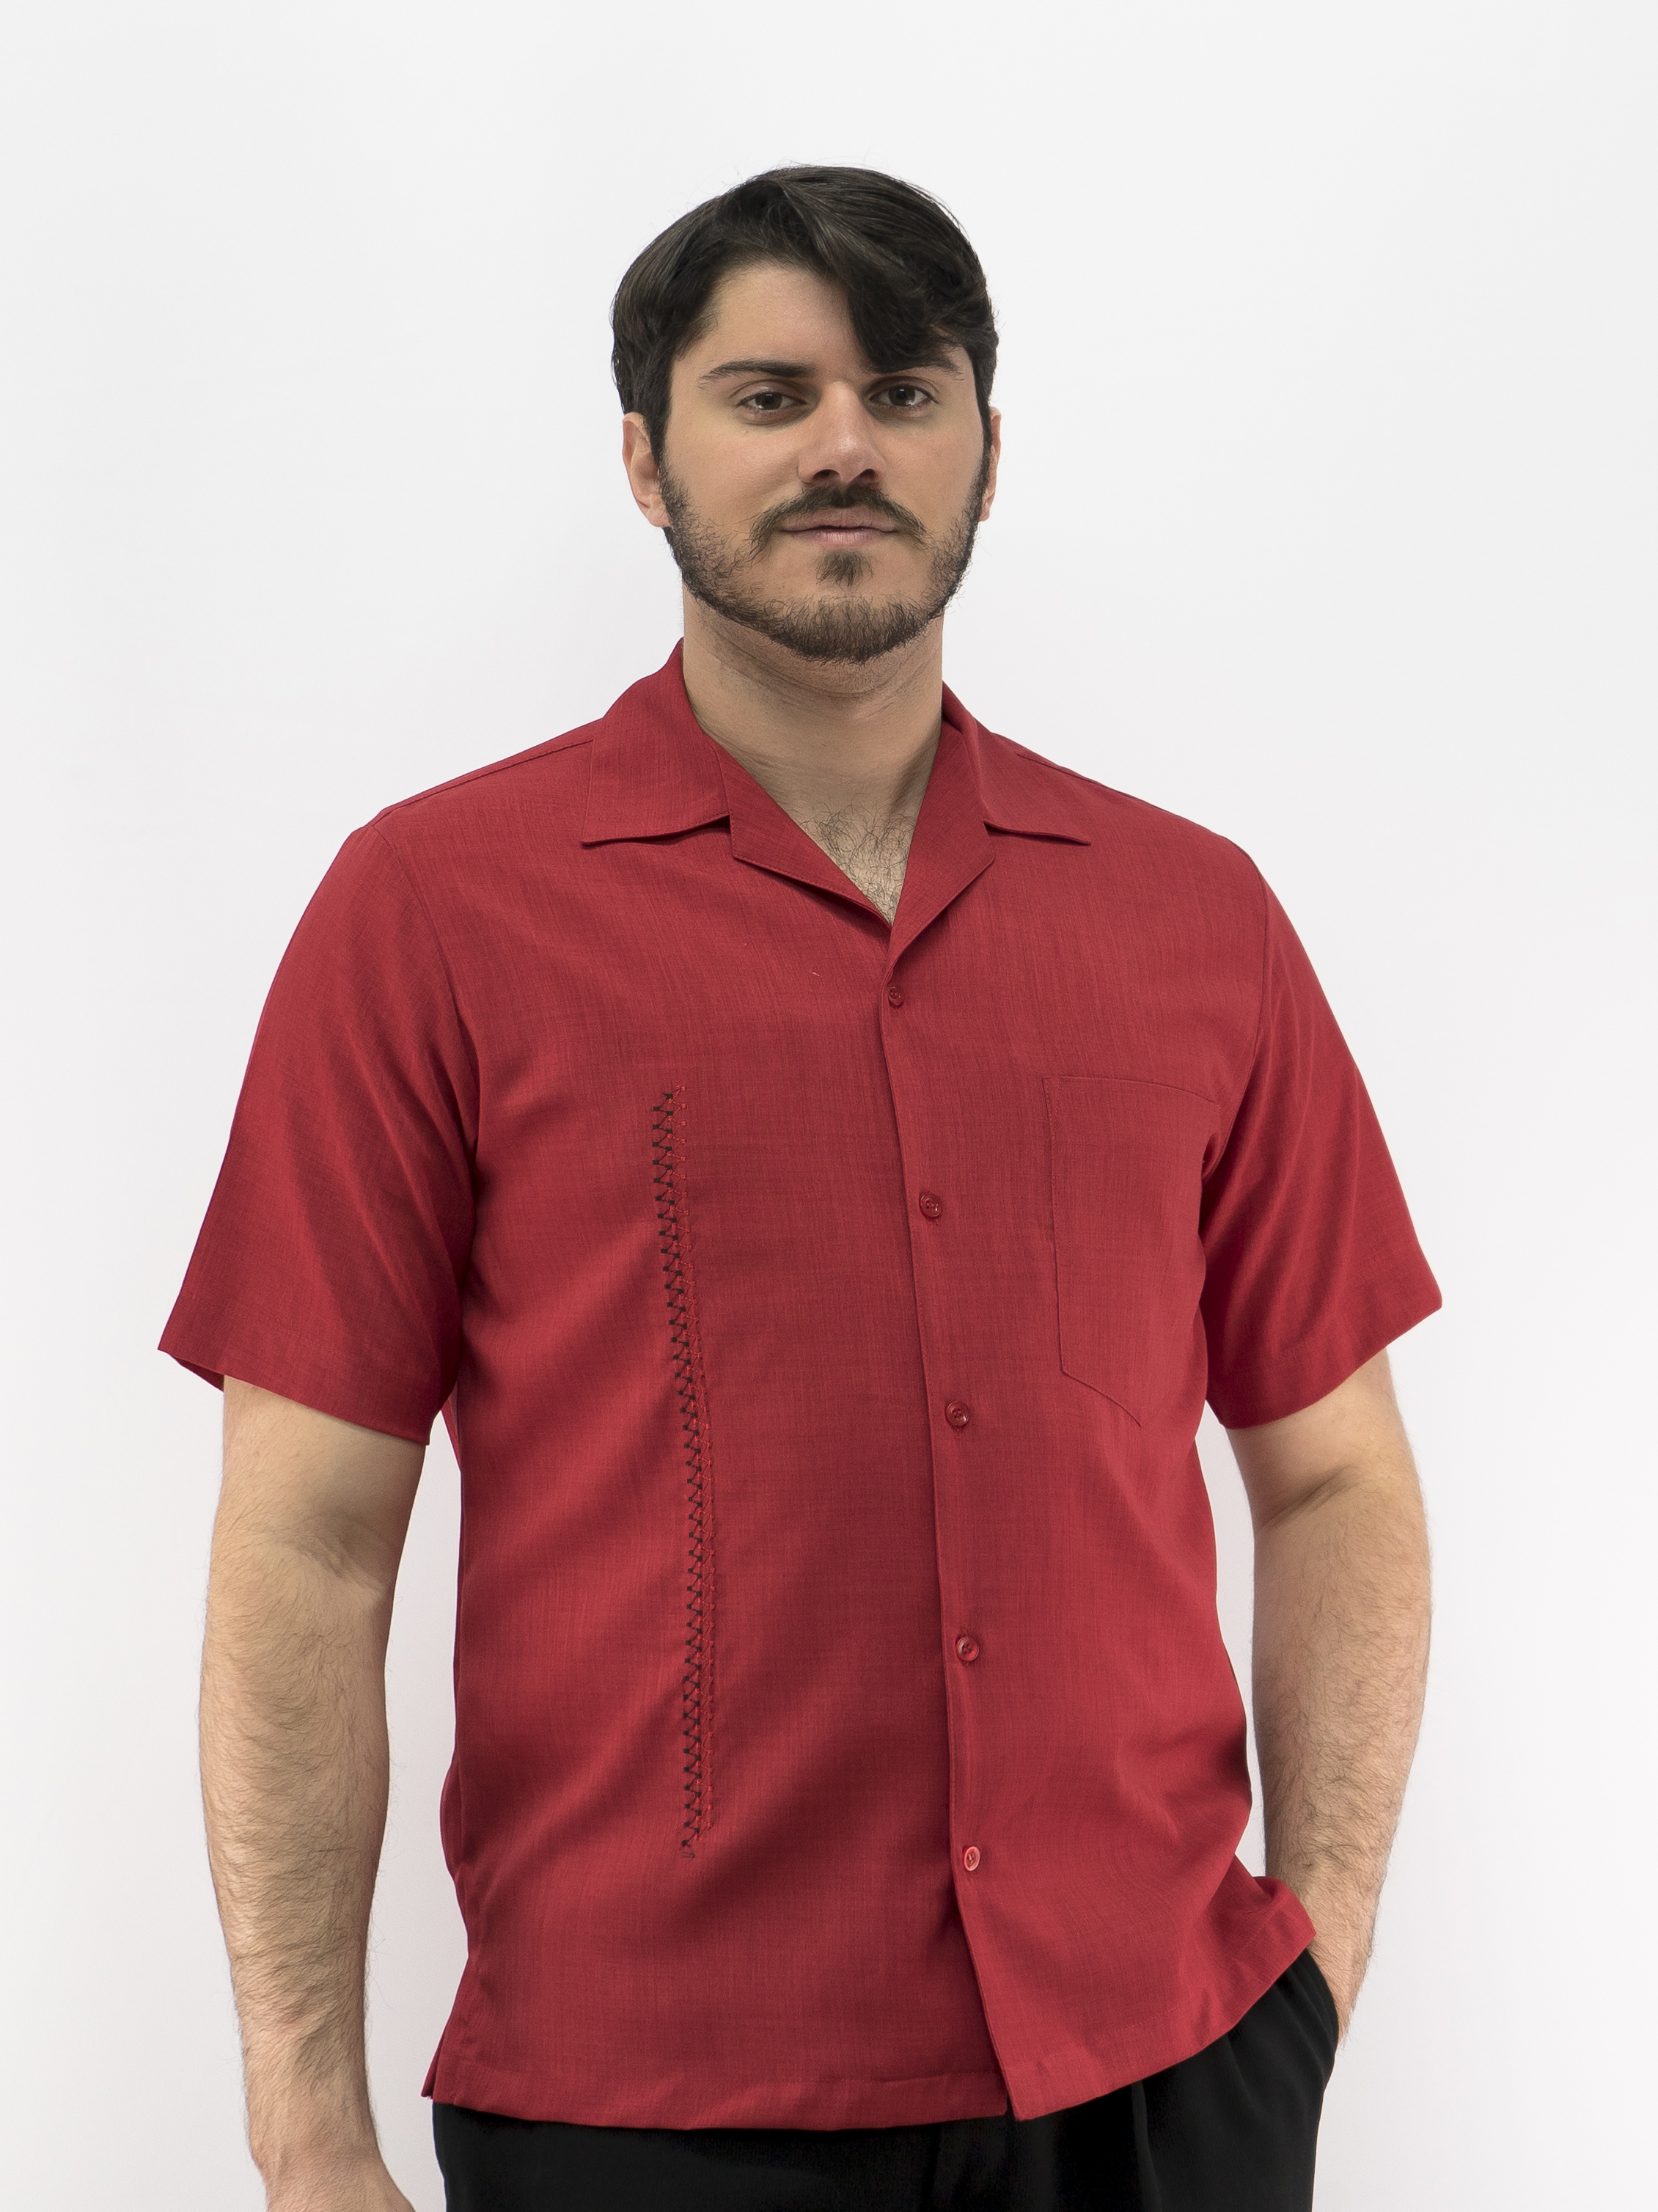 D'Accord Men's Casual Shirt Red 5974